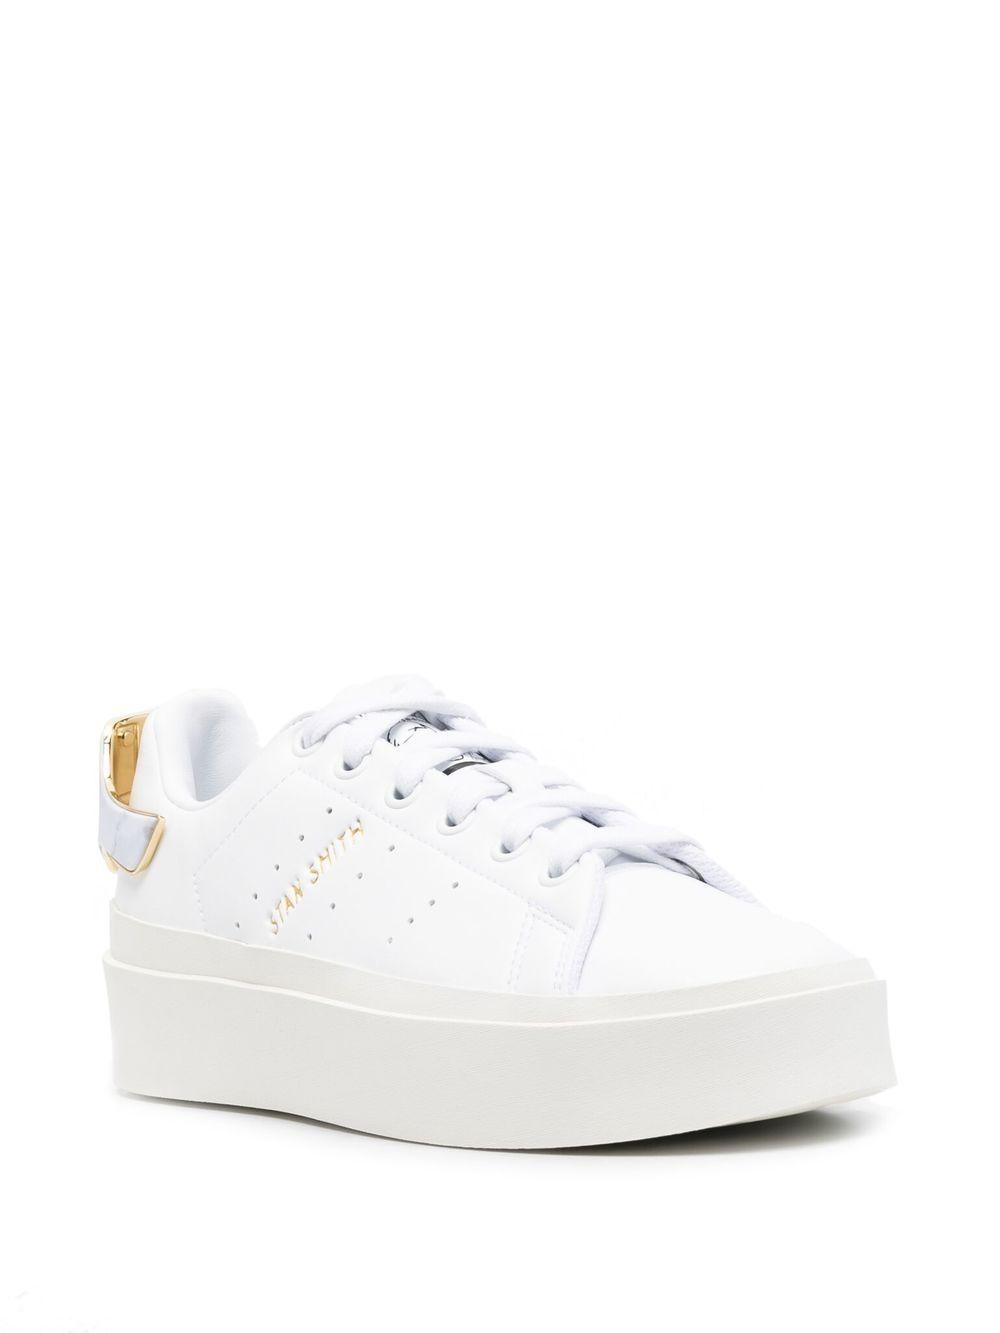 adidas Leather Sneaker in White | Lyst